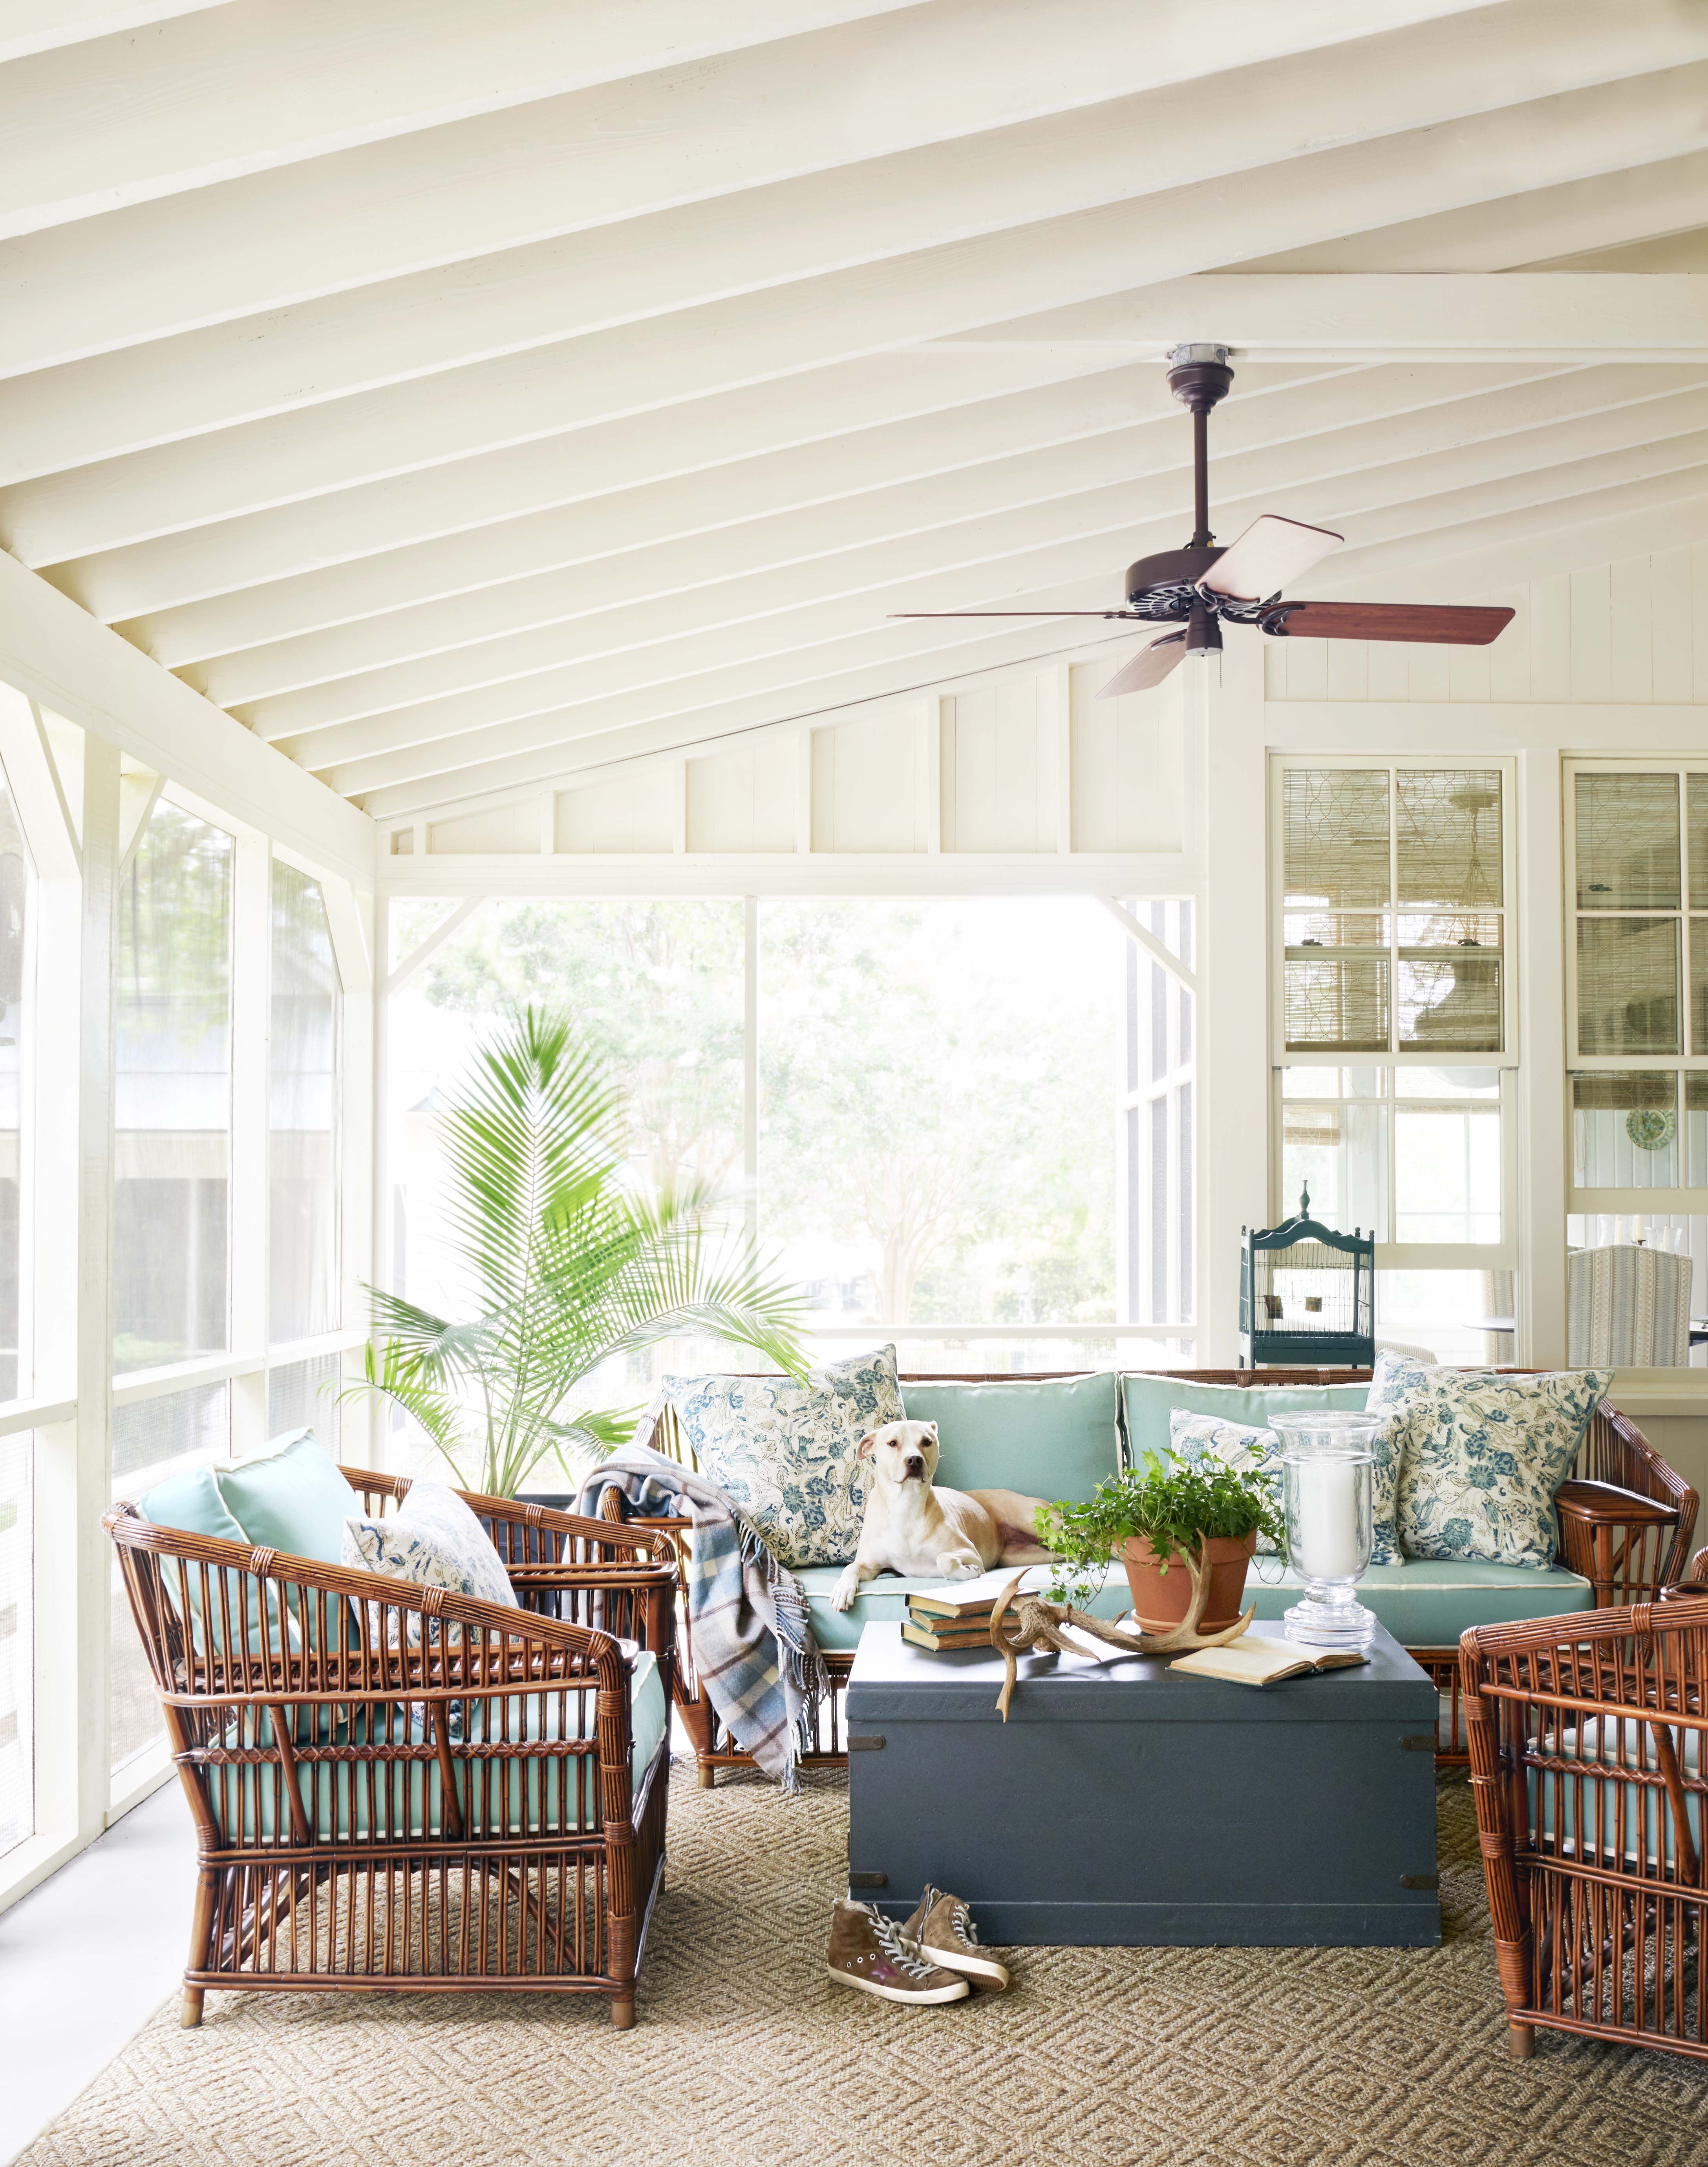 20 Best Front Porch Decorating Ideas   How to Decorate a Patio